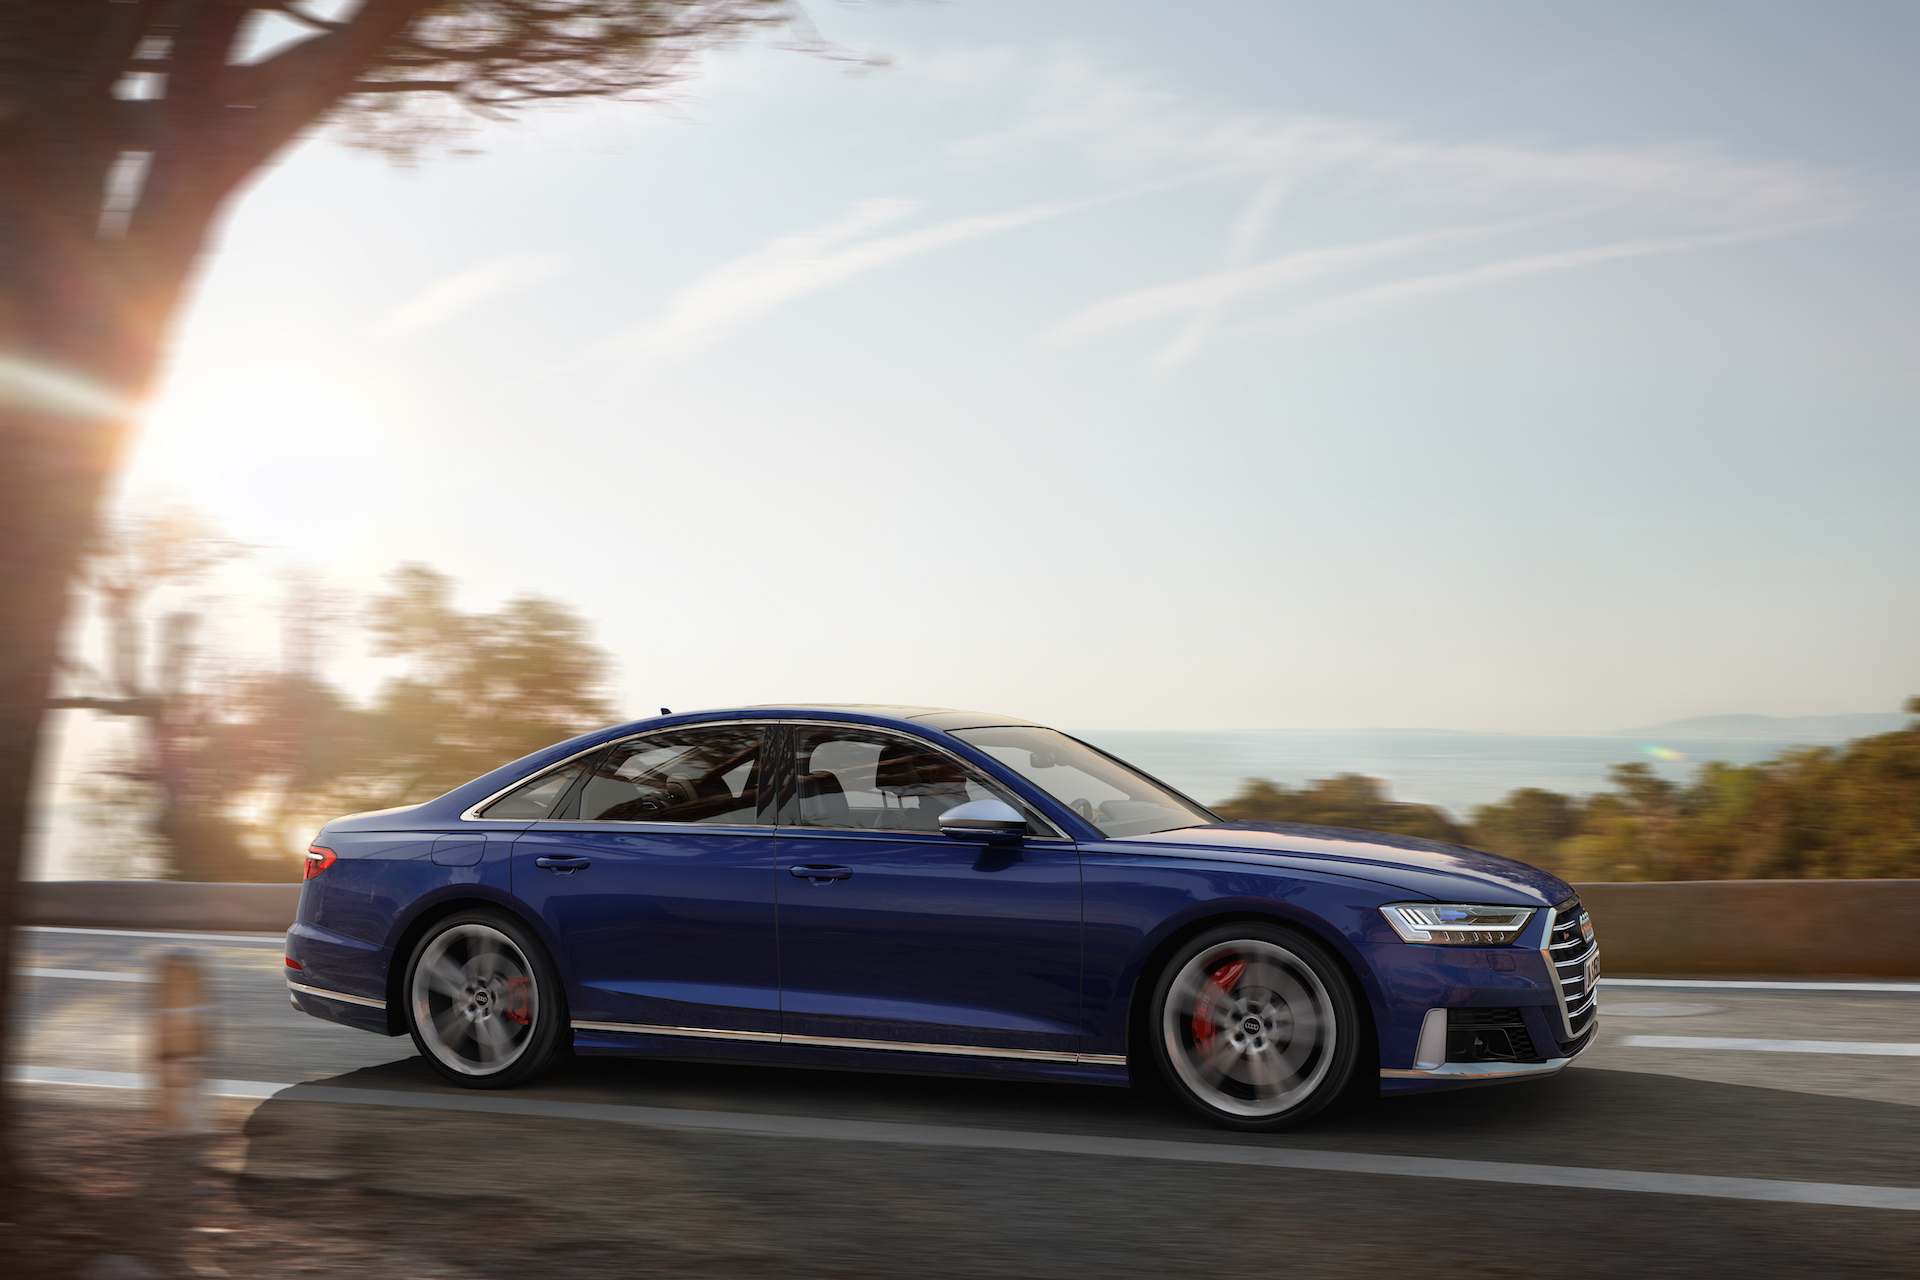 Understated 563horsepower 2020 Audi S8 will set you back 130,495